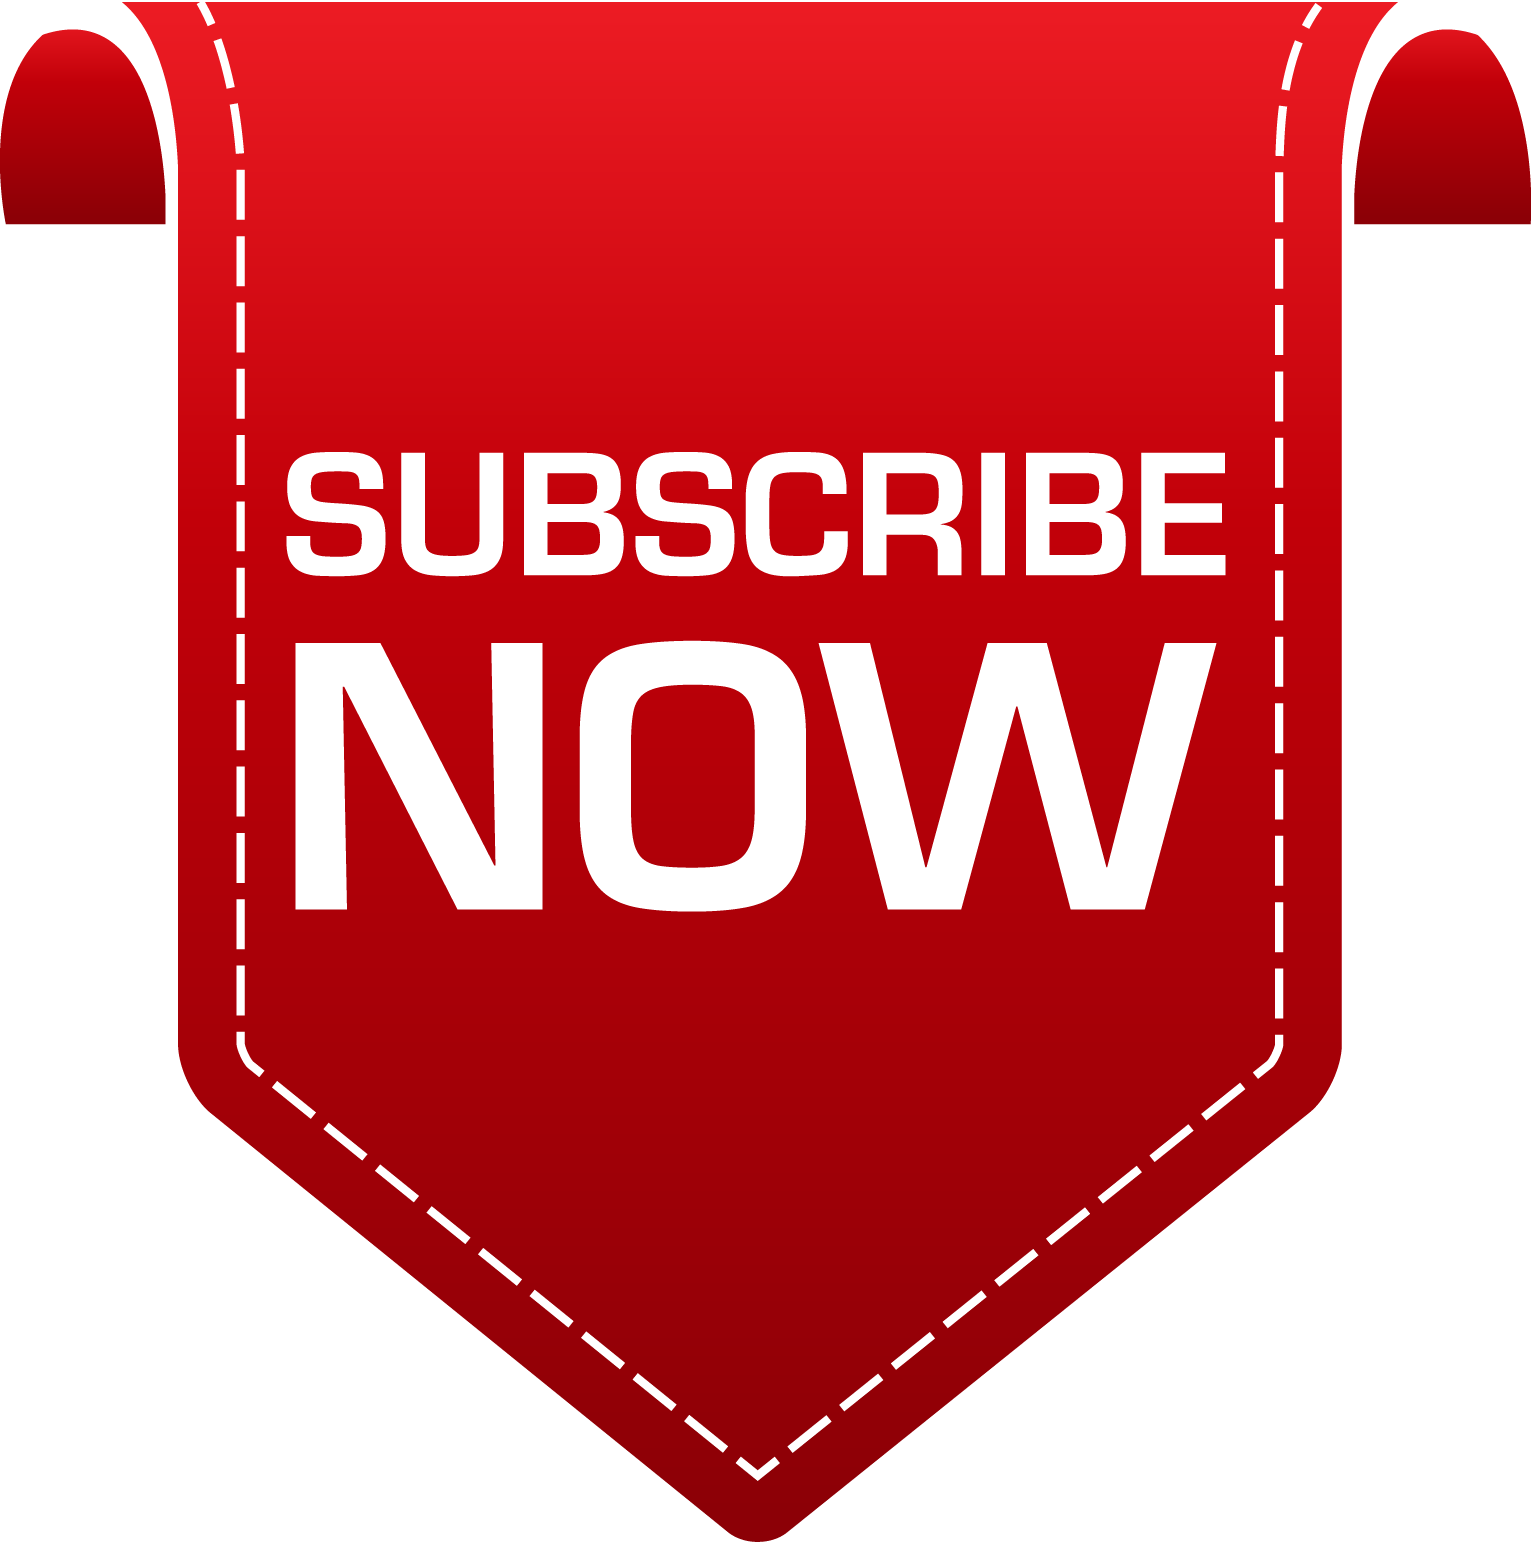 Youtube Subscribe Banner Image PNG Transparent Background, Free Download #39352 - FreeIconsPNG